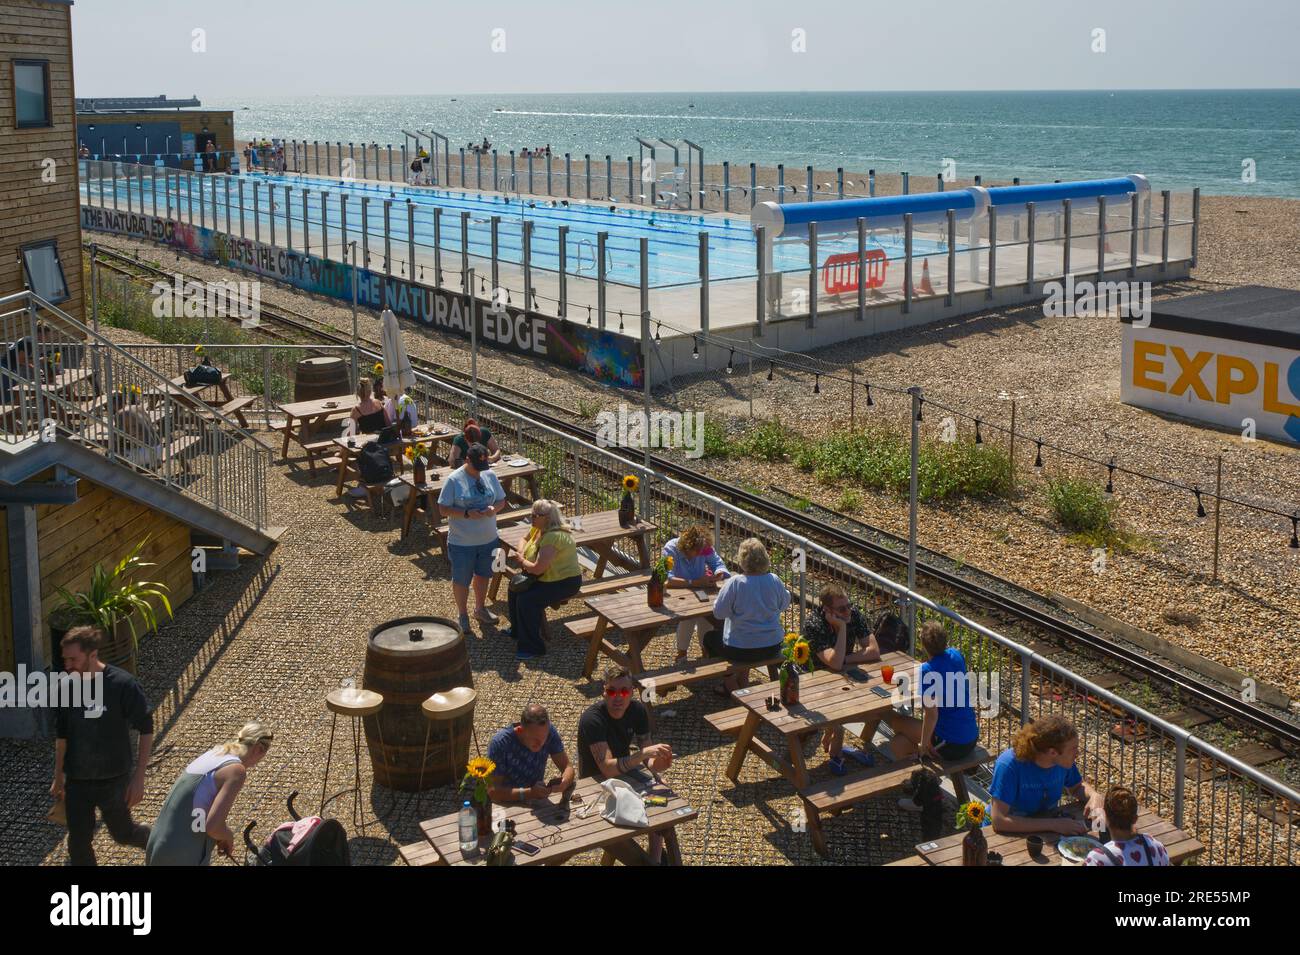 New swimming pool and cafe restaurant on shingle beach at Brighton, East Sussex, England. With people in pool and cafe. Stock Photo